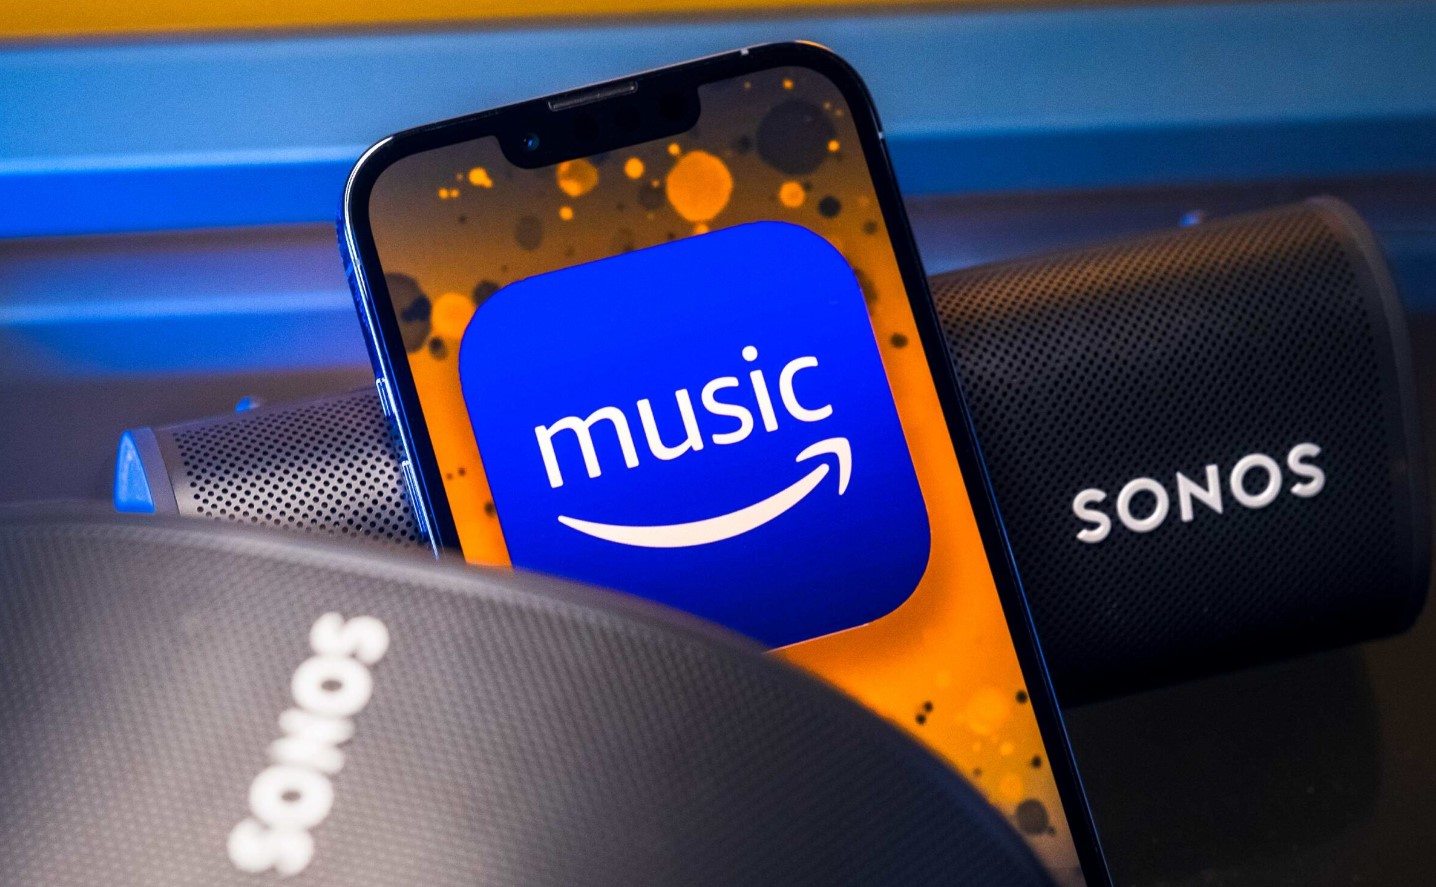 How To Give Digital Music As A Gift On Amazon